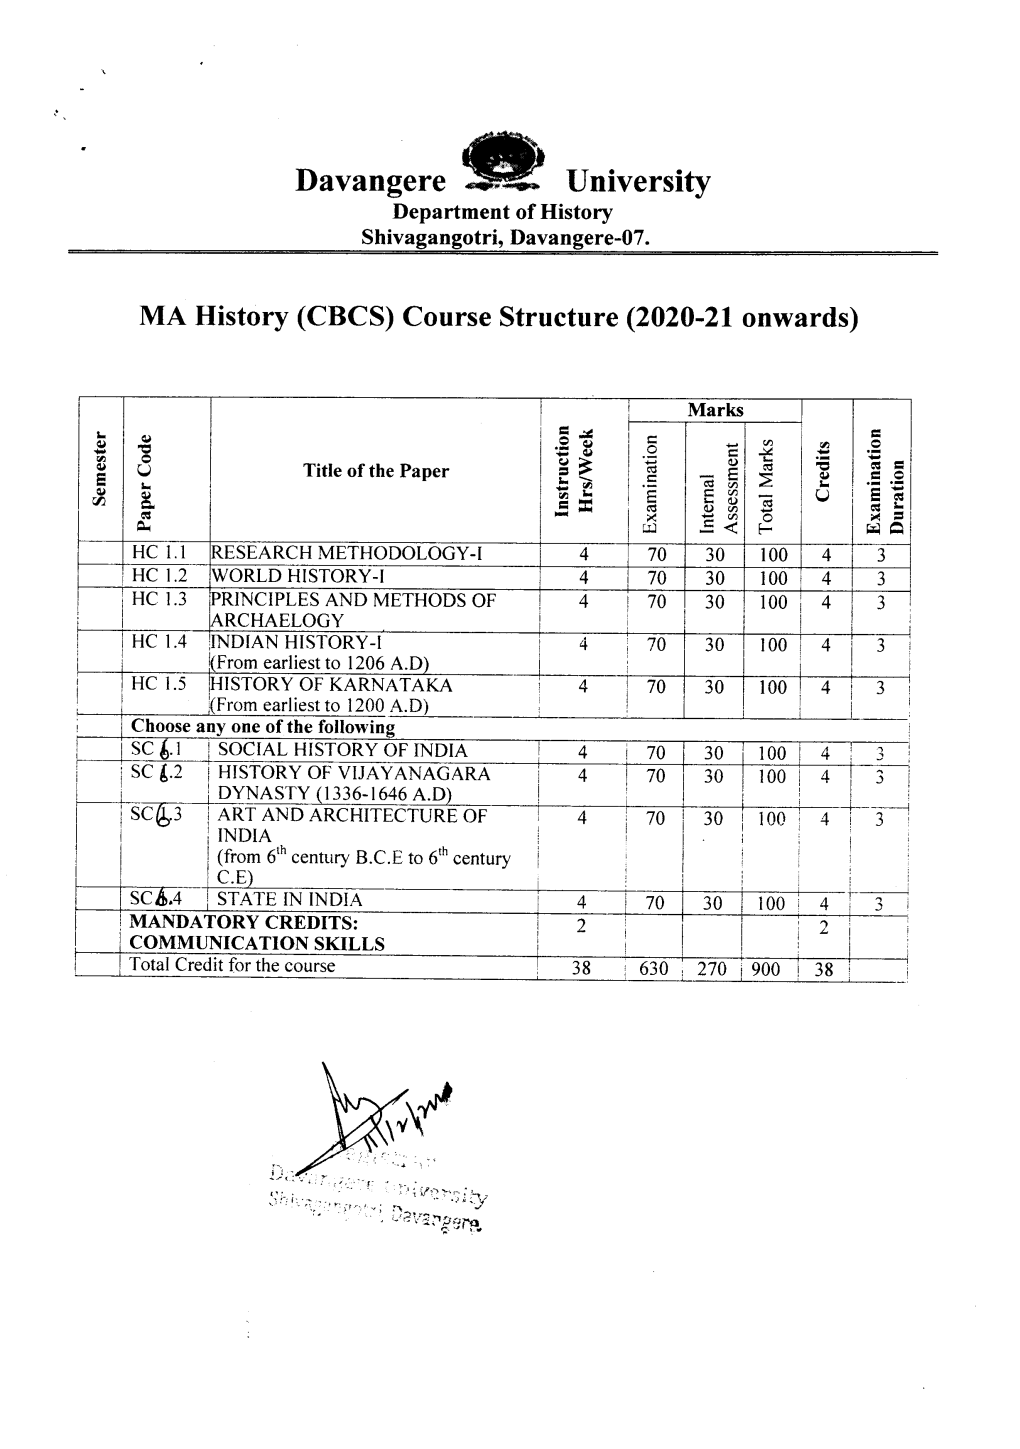 MA History (CBCS) Course Structure (2020-21Onwards)